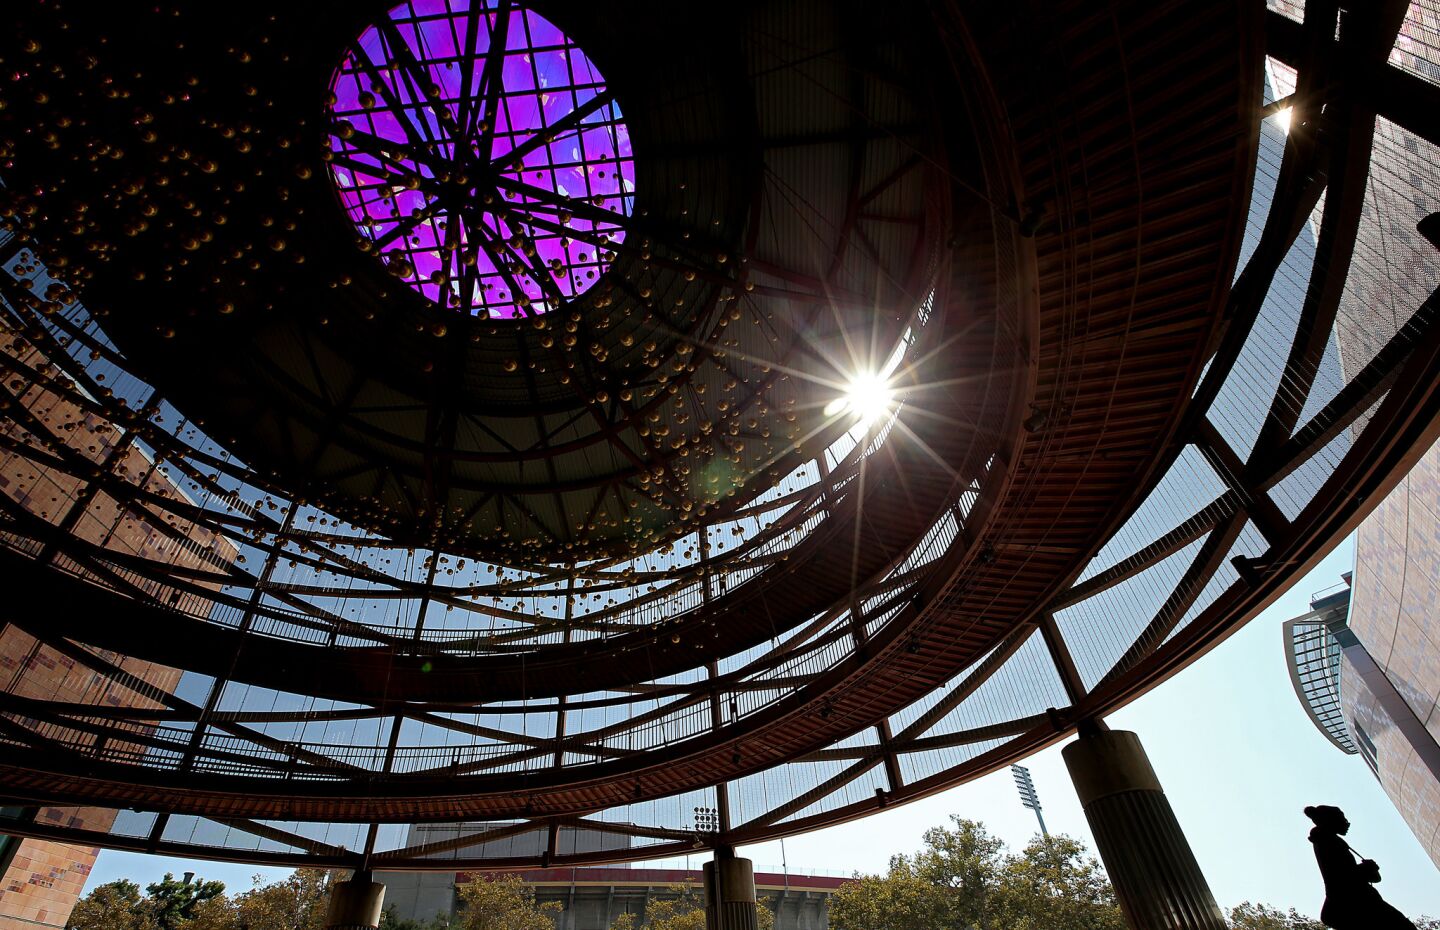 A woman shelters in the shade of the entrance to the California Science Center in Exposition Park.